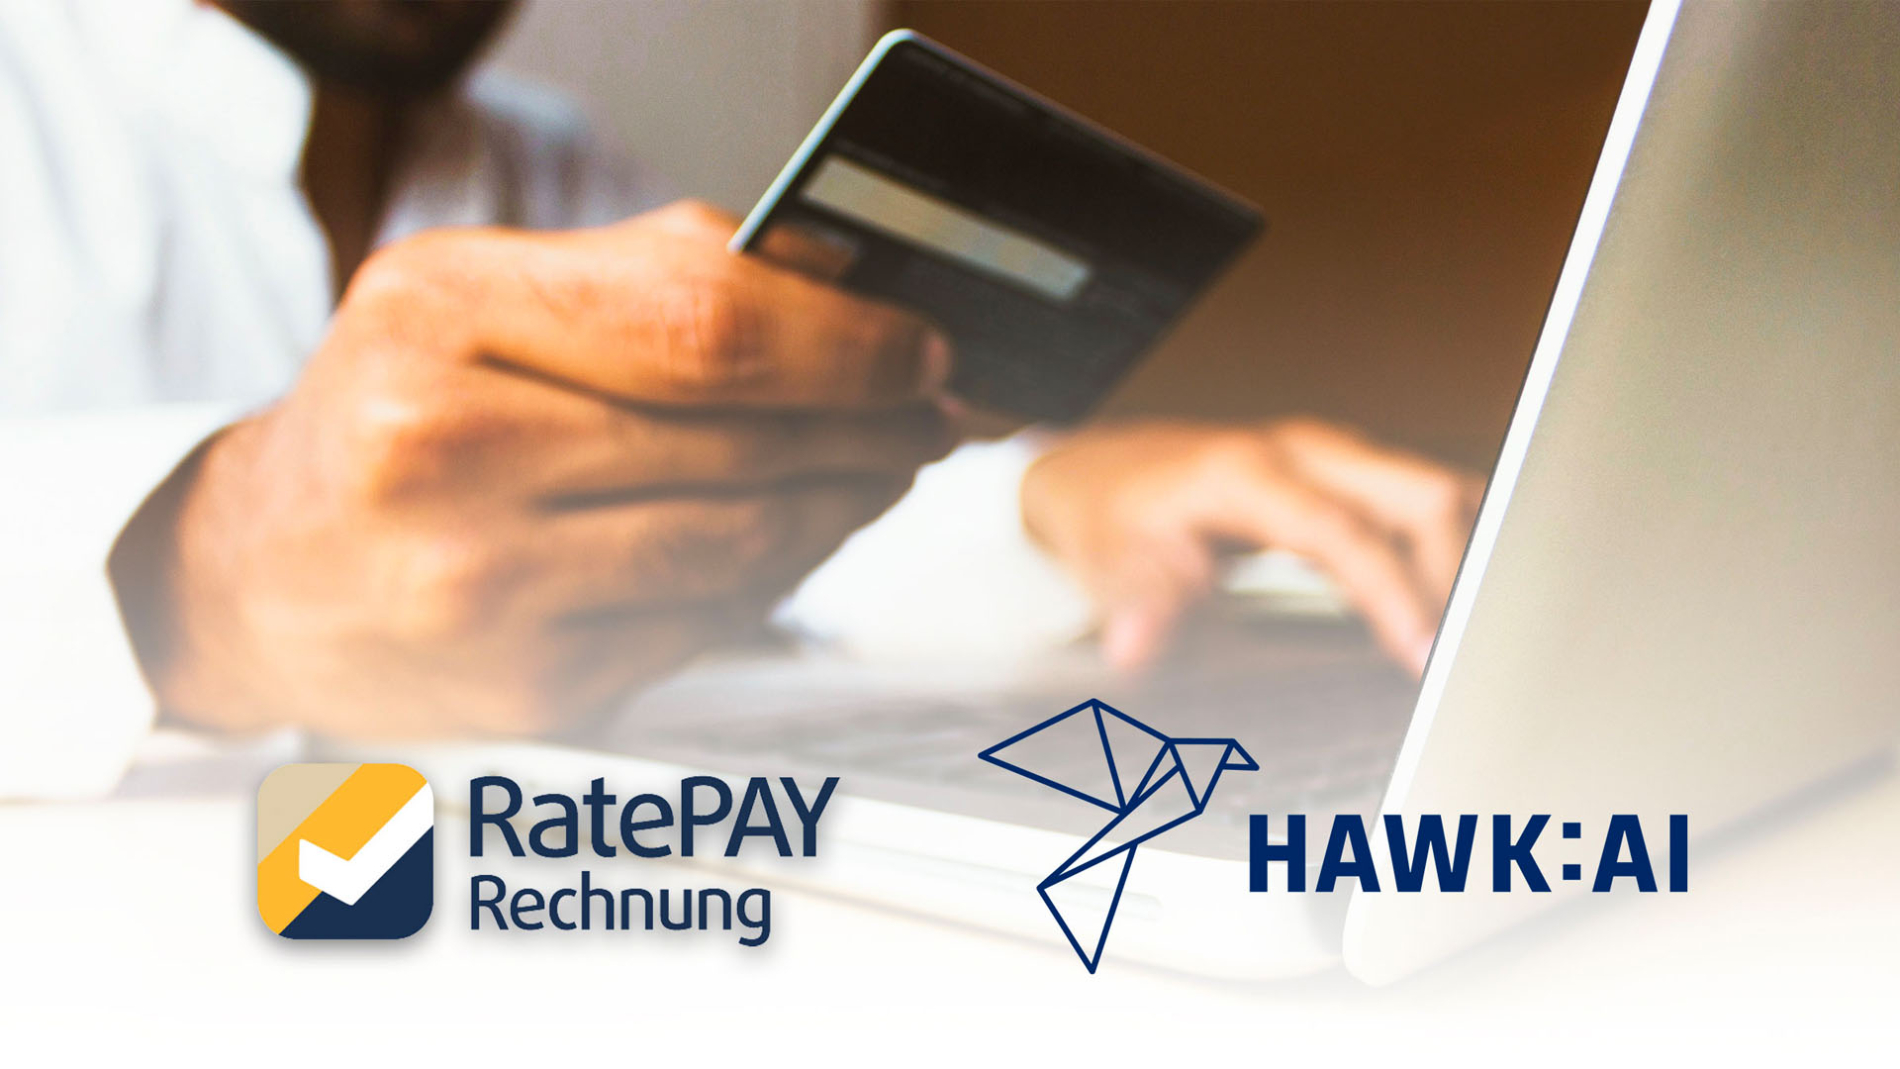 Partnership with Ratepay Rechnung